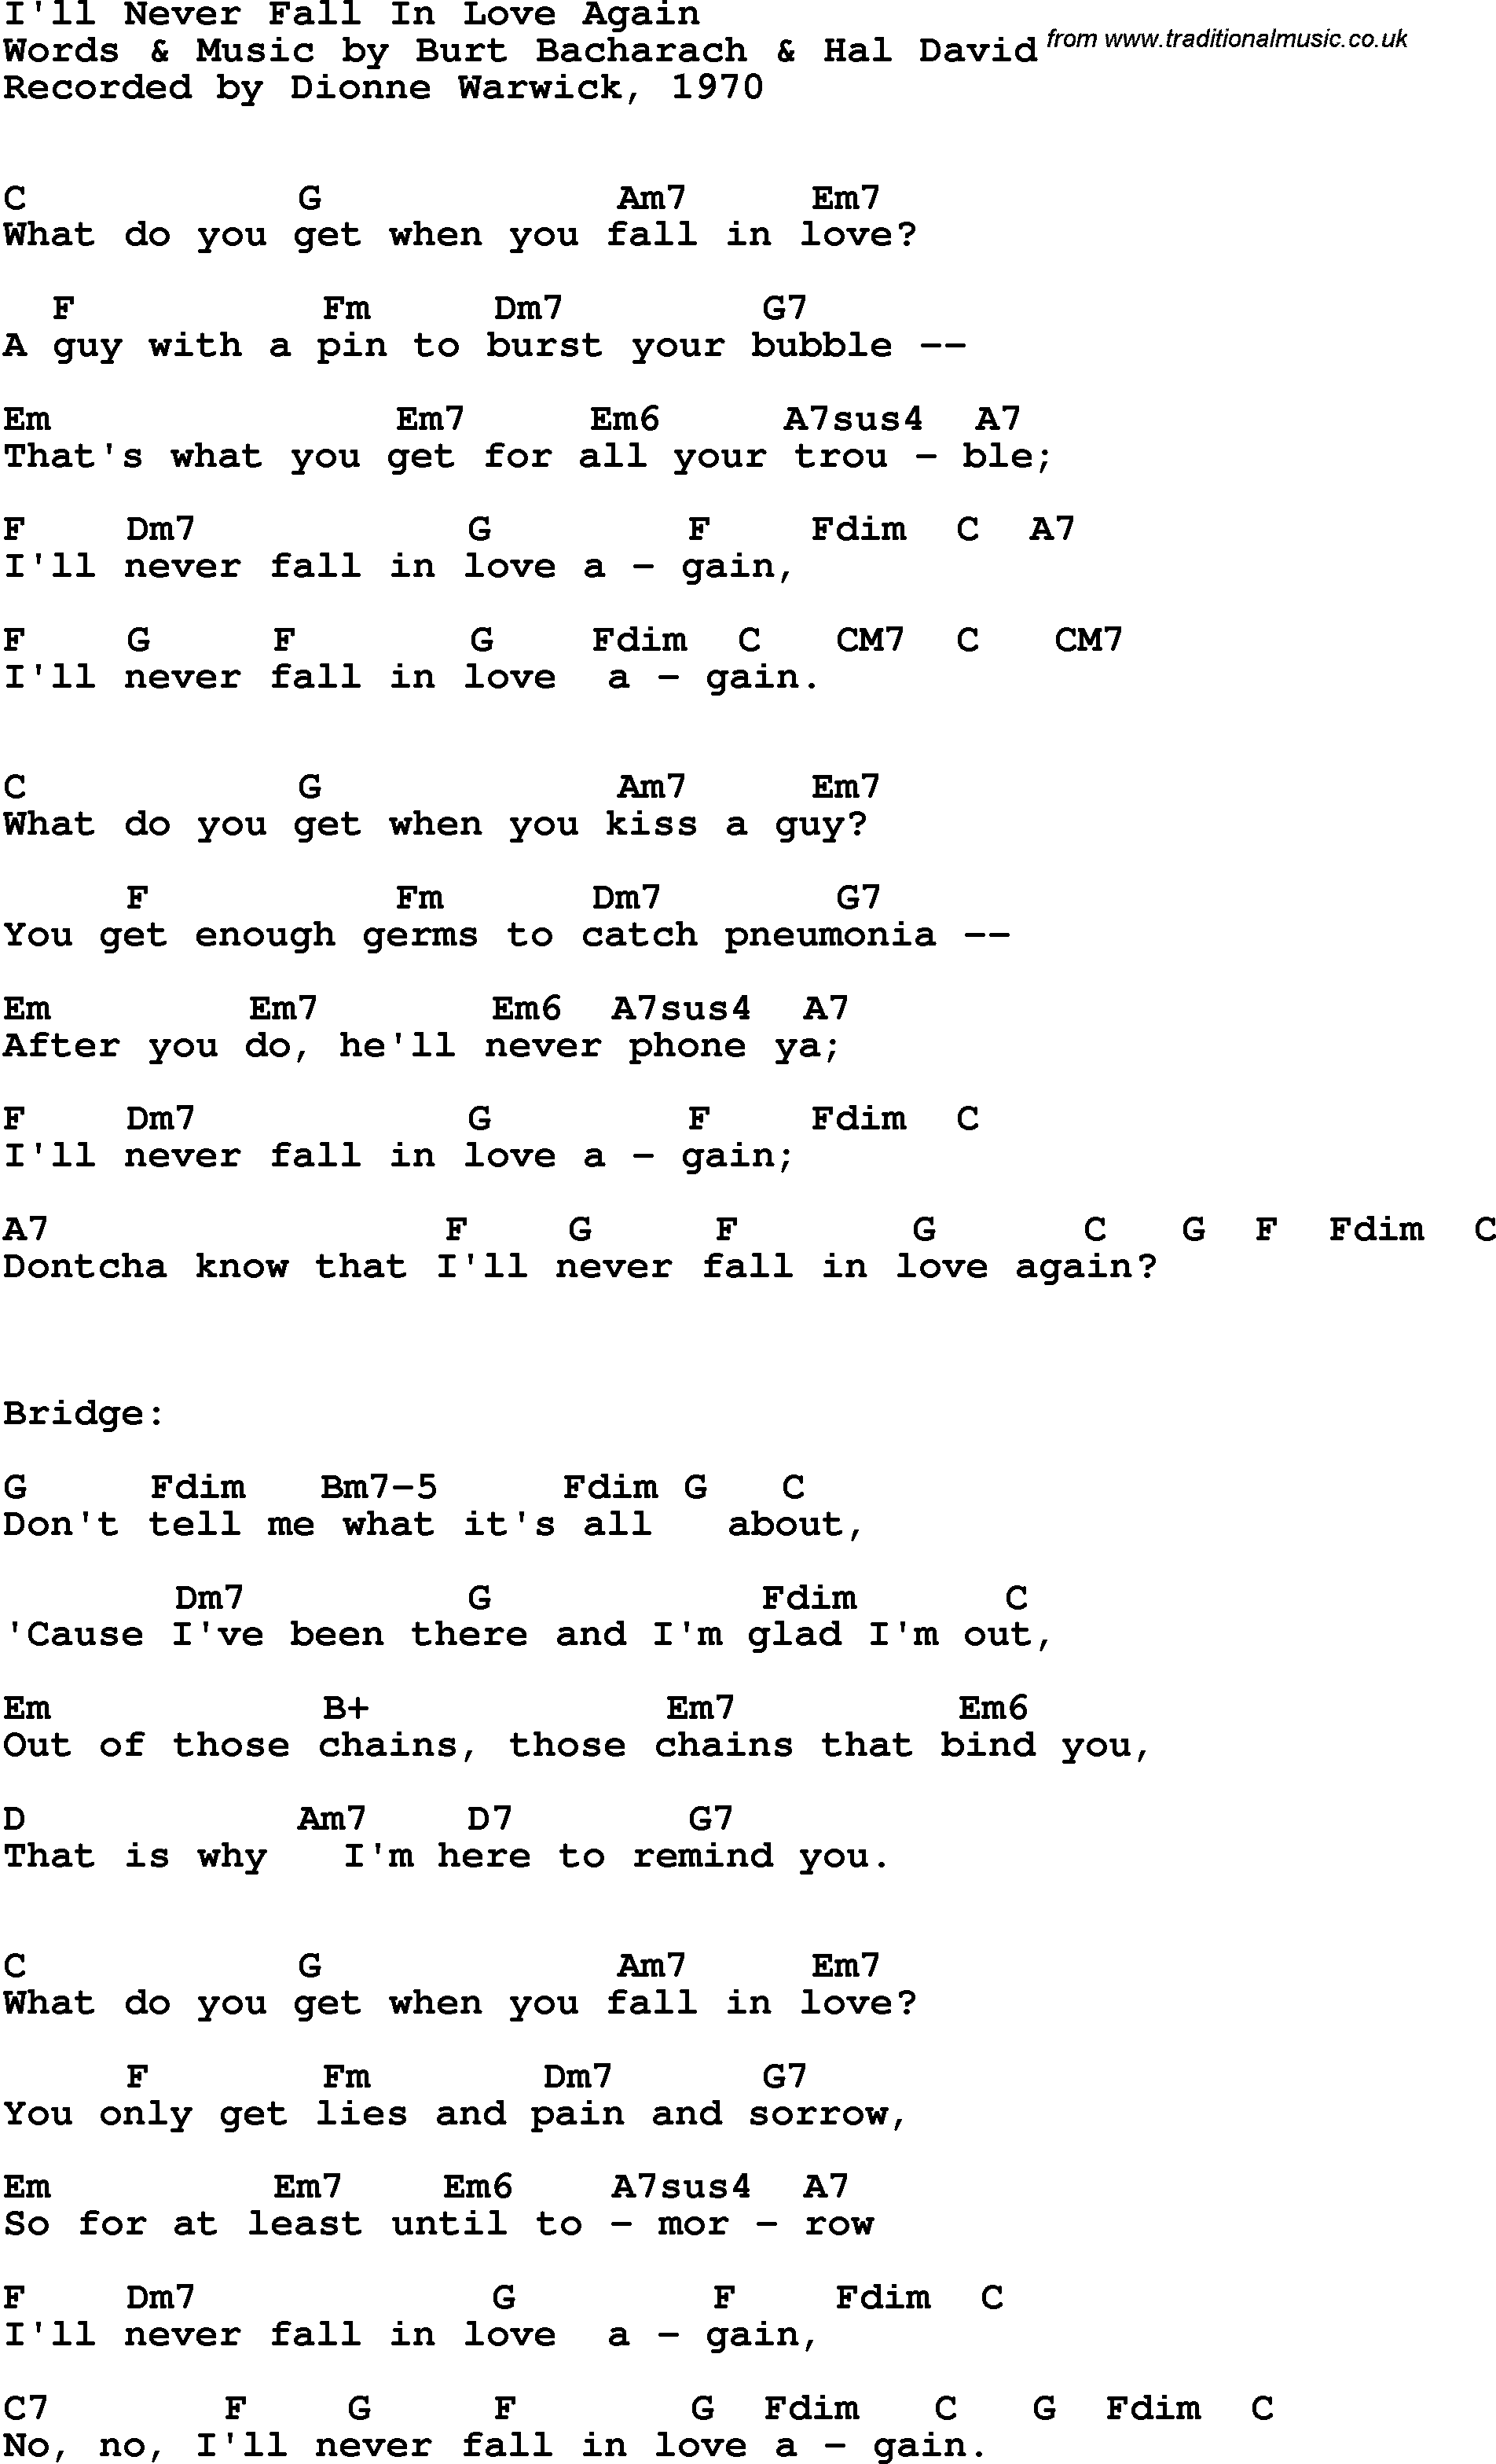 Song Lyrics with guitar chords for I'll Never Fall In Love Again - Dionne Warwick, 1970